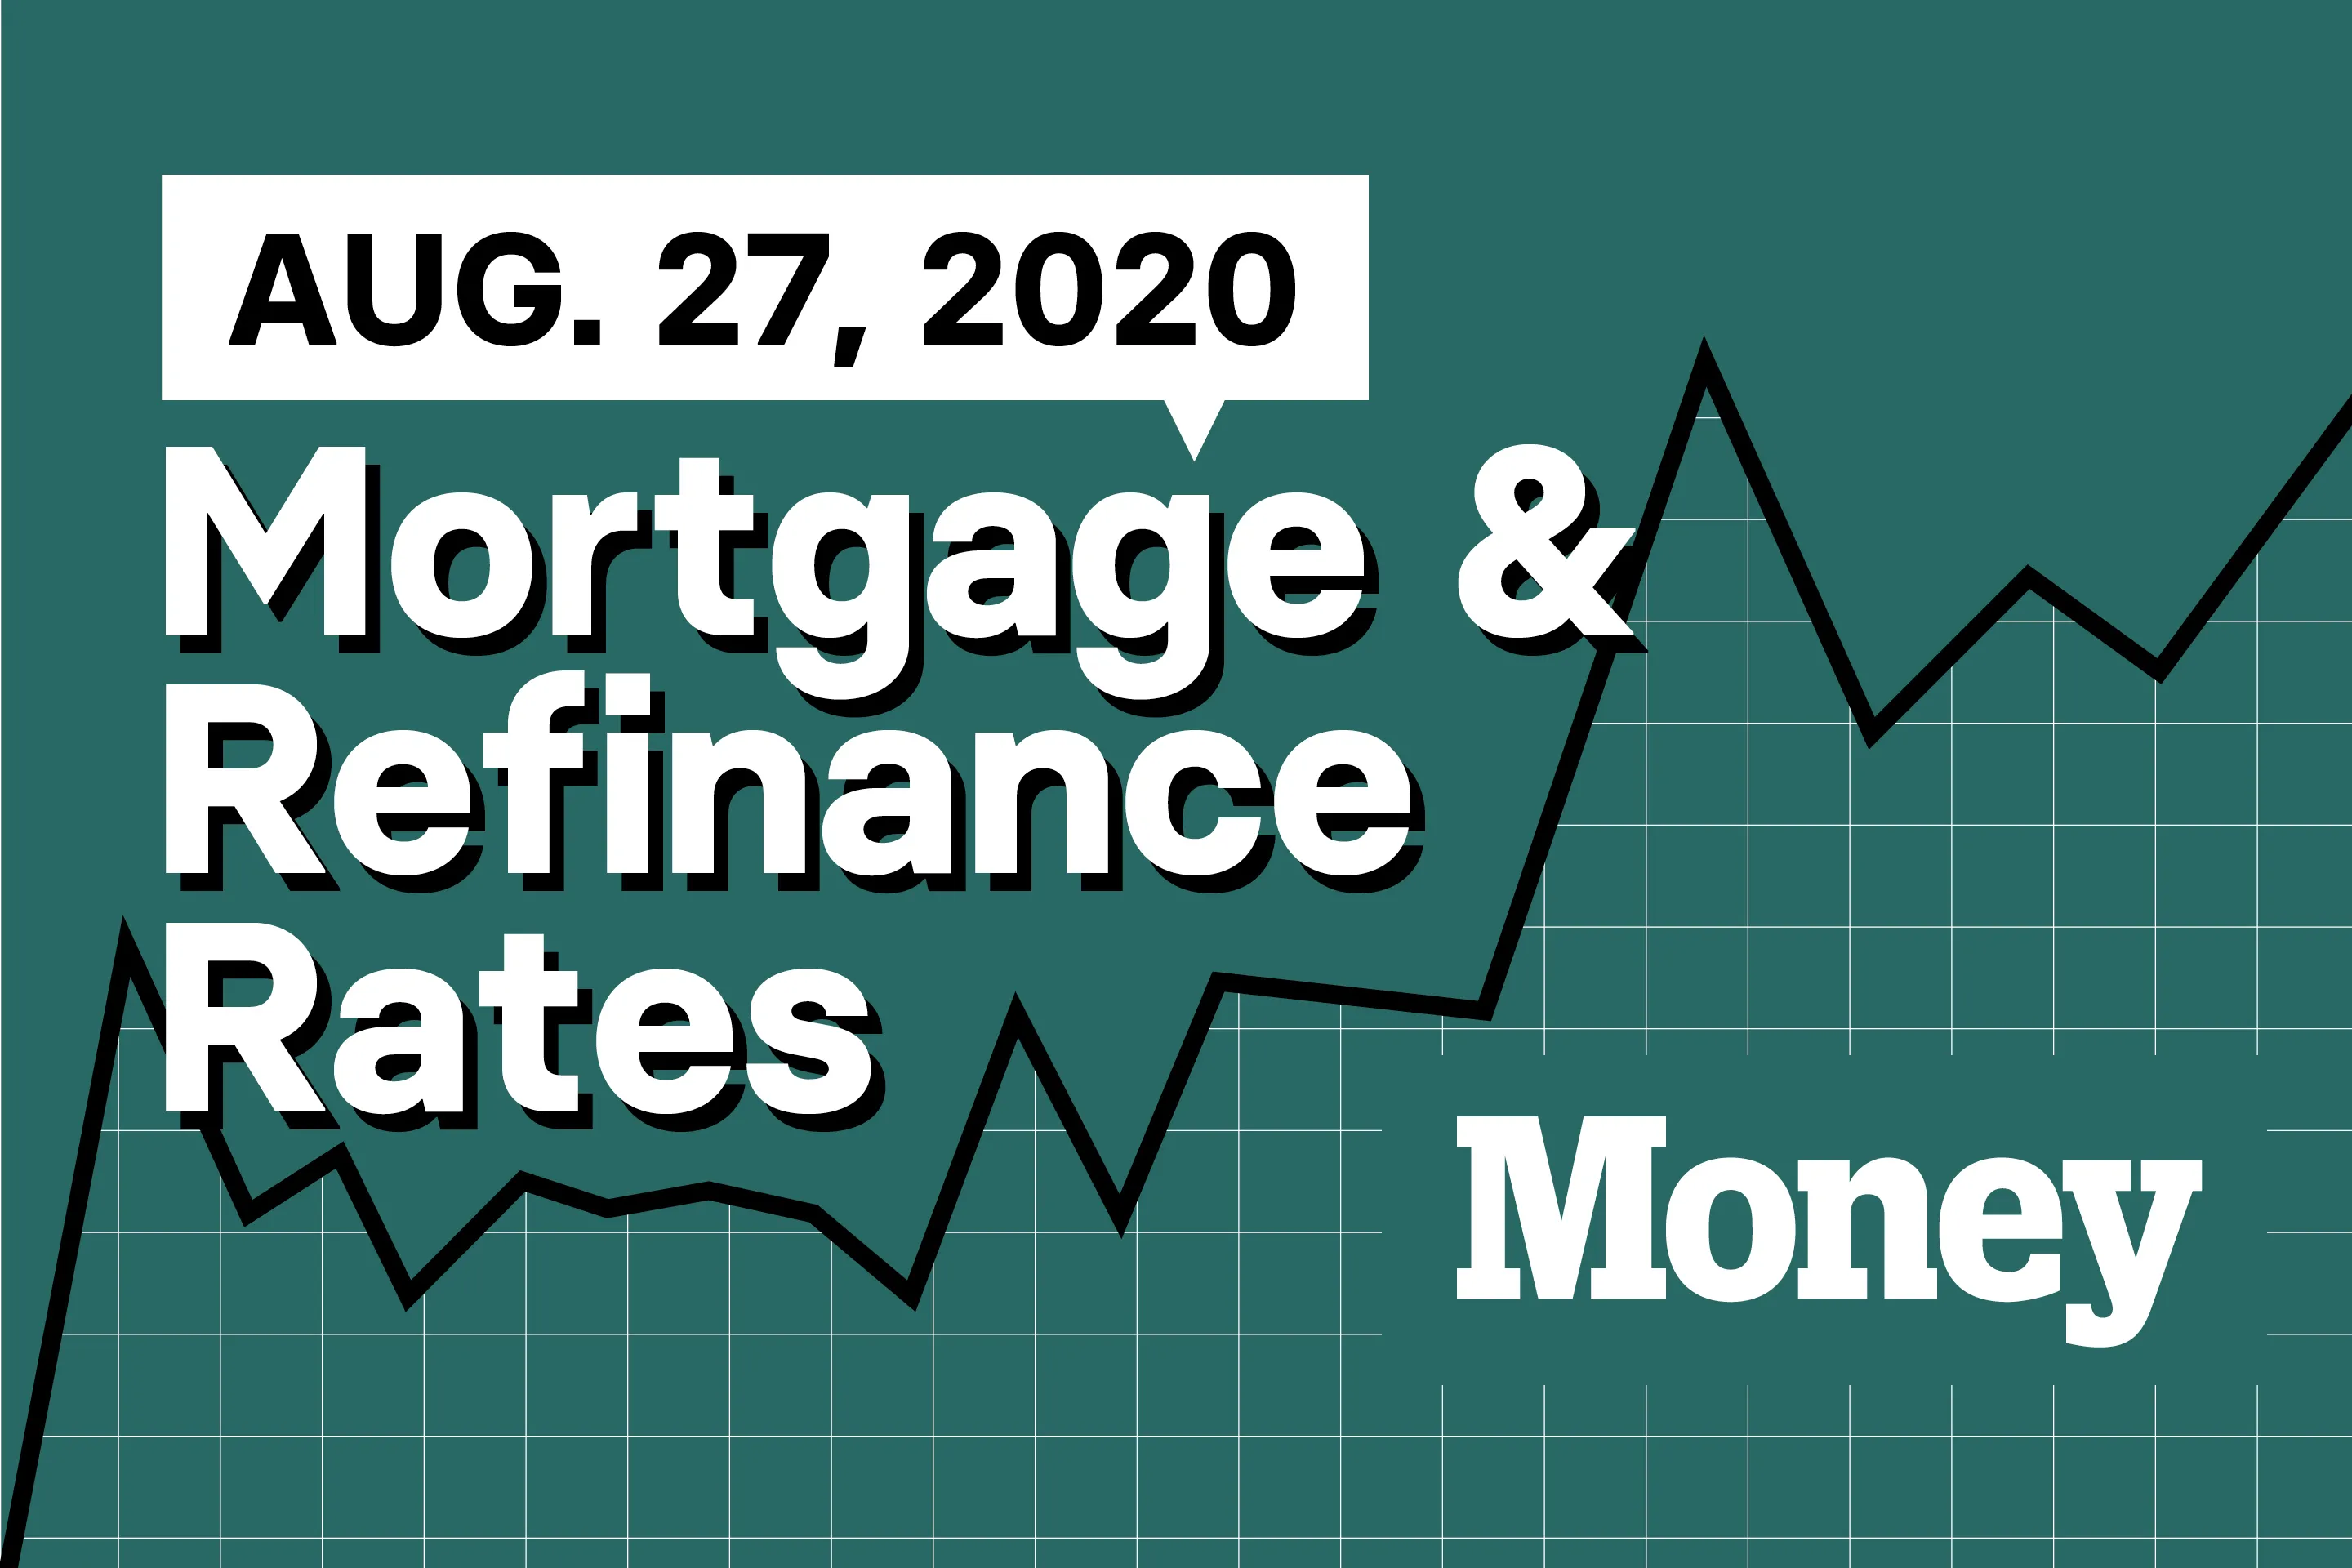 Here Are Today's Best Mortgage & Refinance Rates for August 27, 2020